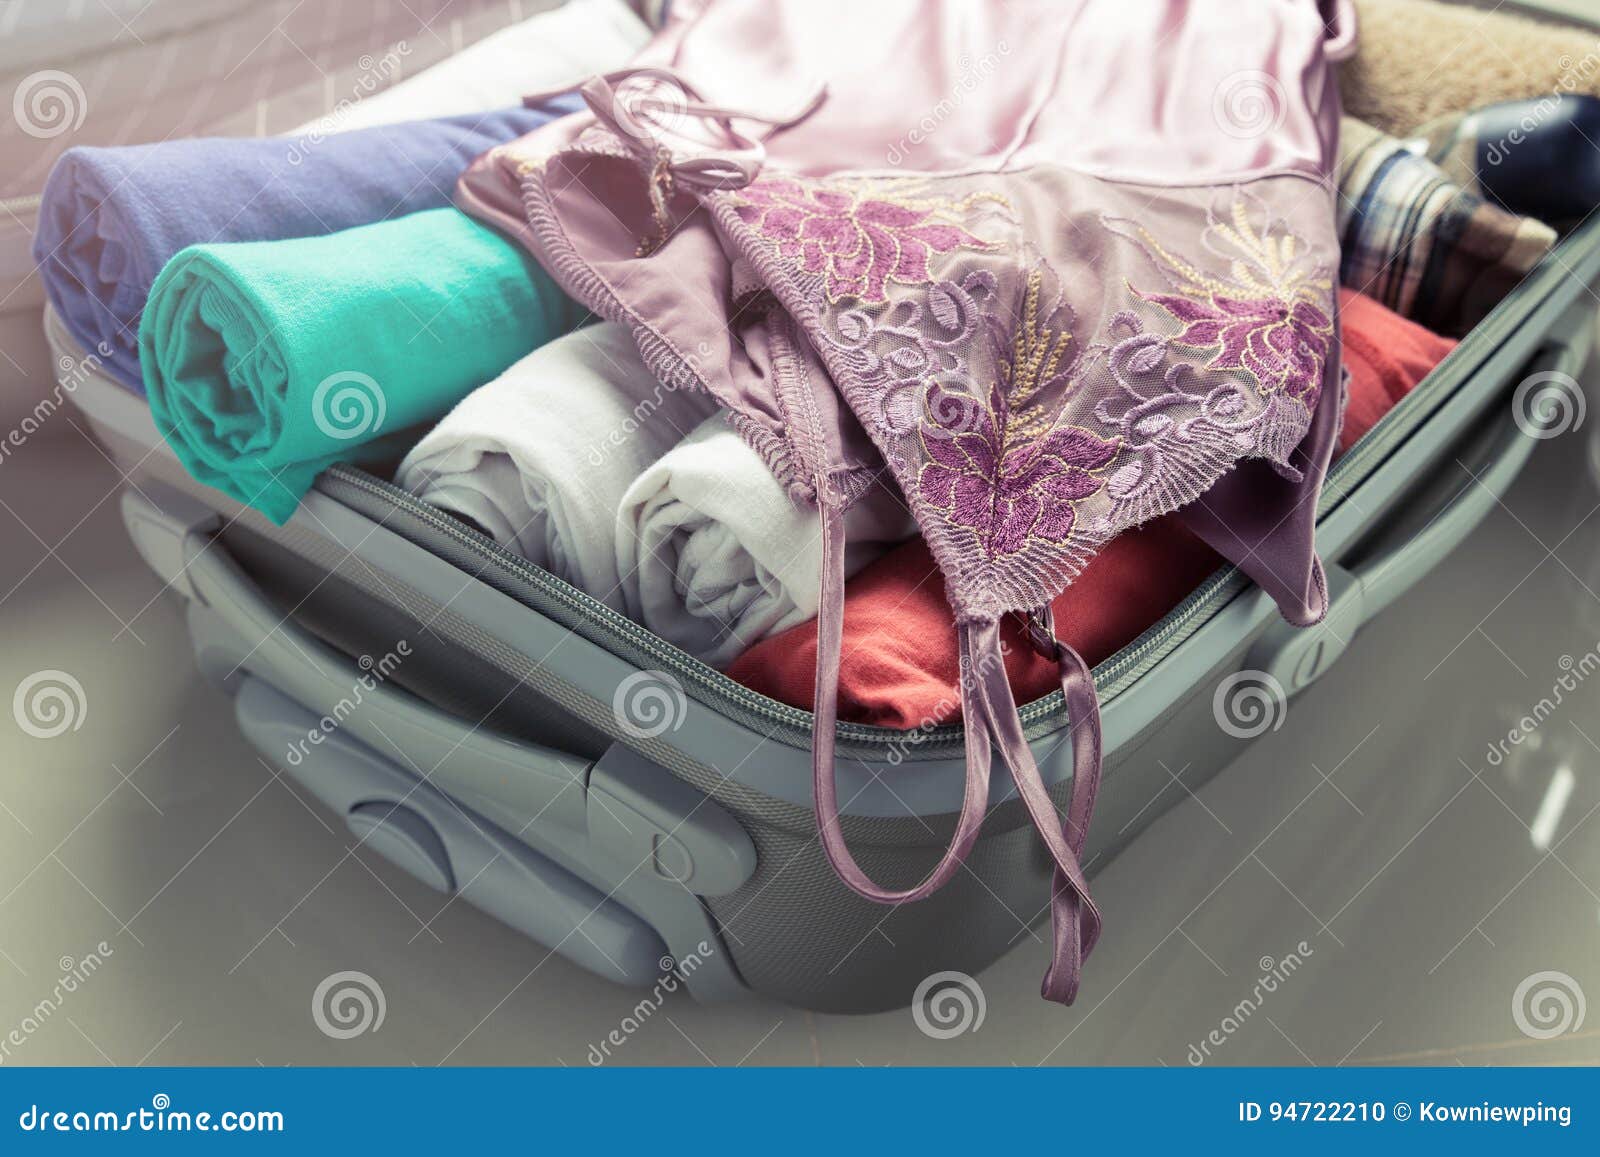 https://thumbs.dreamstime.com/z/packing-clothes-travel-bag-luggage-people-concept-front-view-94722210.jpg